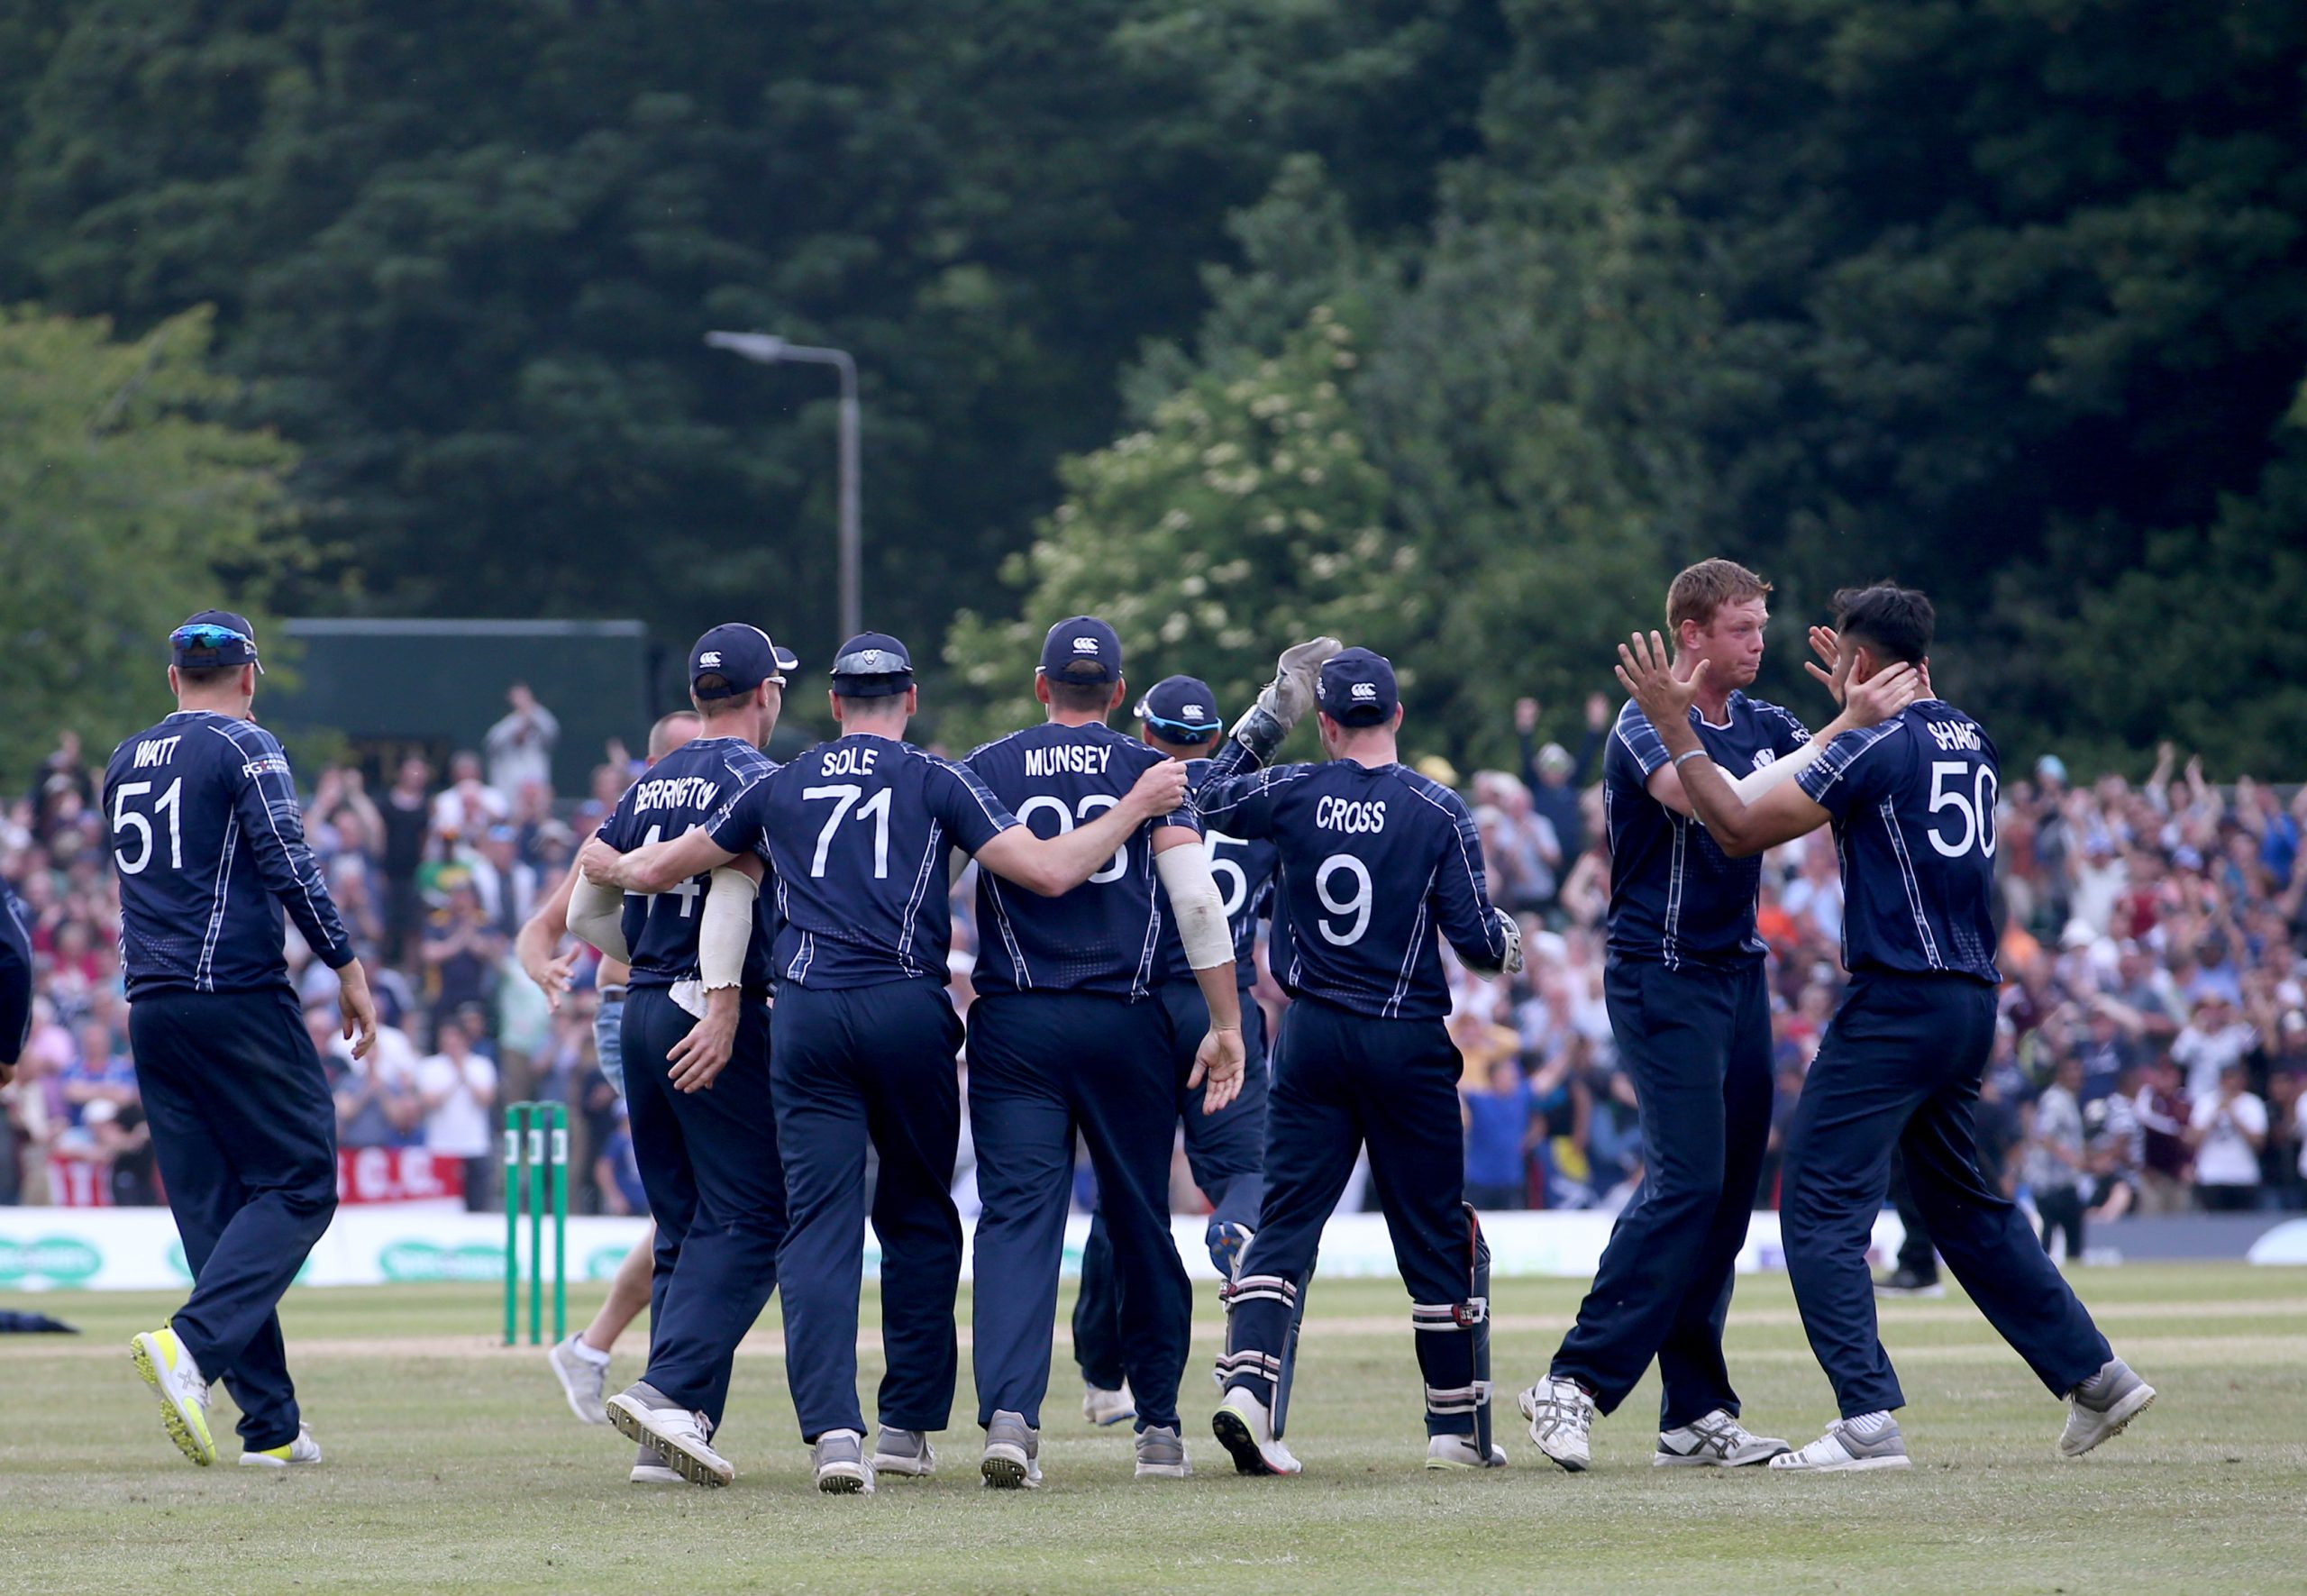 A great experience – Doug Watson relishing chance to guide Scotland to World Cup